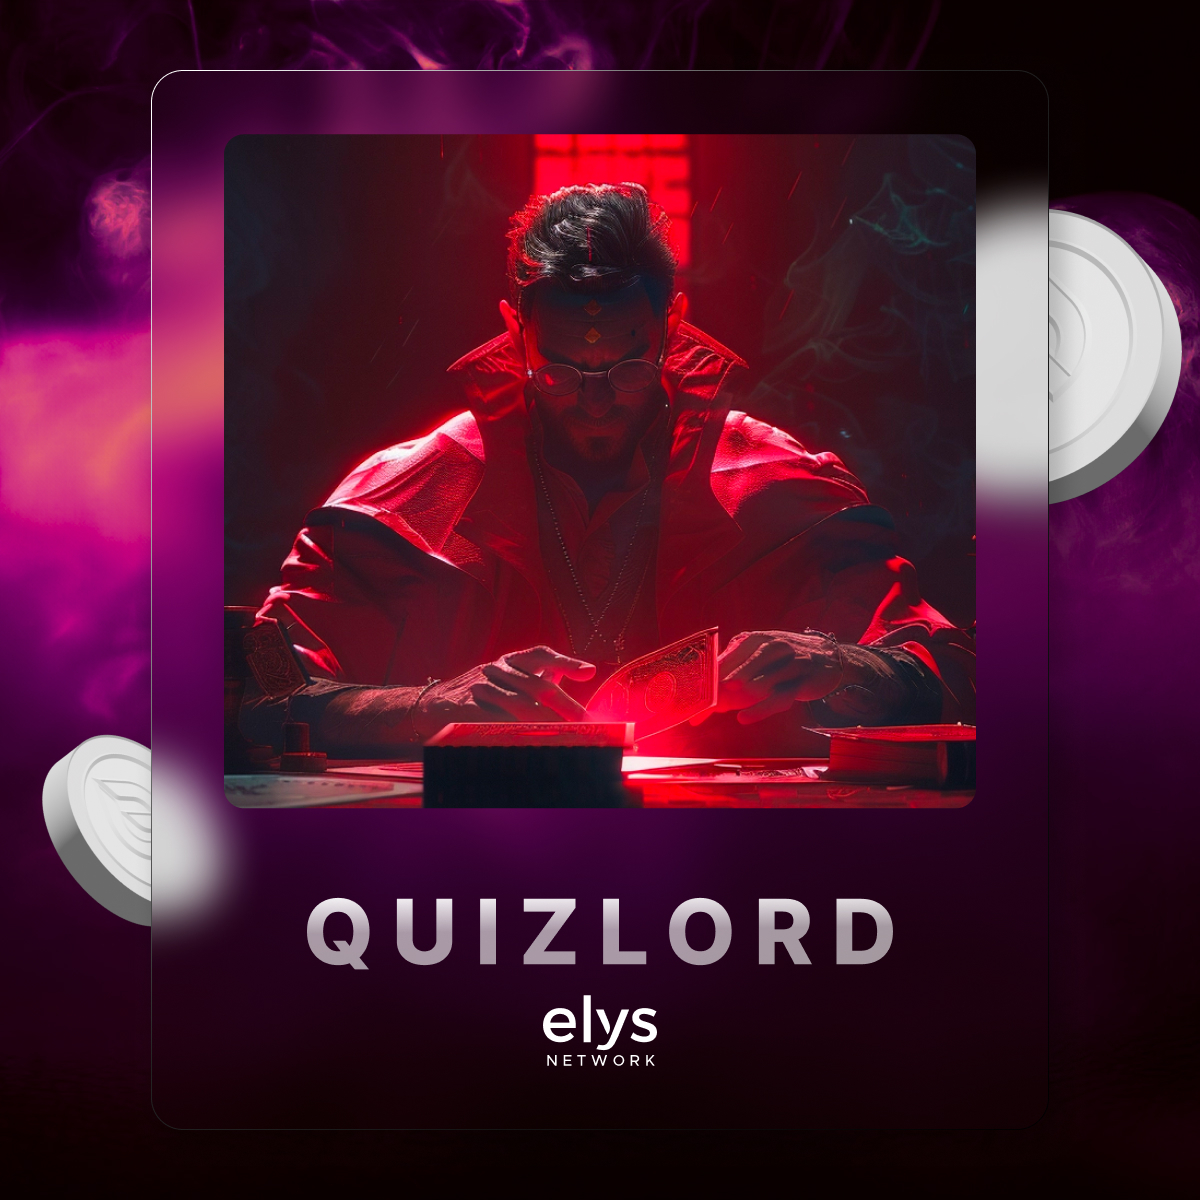 Let's kick things off with a teaser: We've always said it, and we mean it : 𝐨𝐮𝐫 𝐂𝐚𝐝𝐞𝐭𝐬 𝐚𝐫𝐞 𝐨𝐮𝐫 𝐎𝐆𝐬. Participants in our weekly quizzes have just stumbled upon this exciting revelation. What do you think it is?🤔